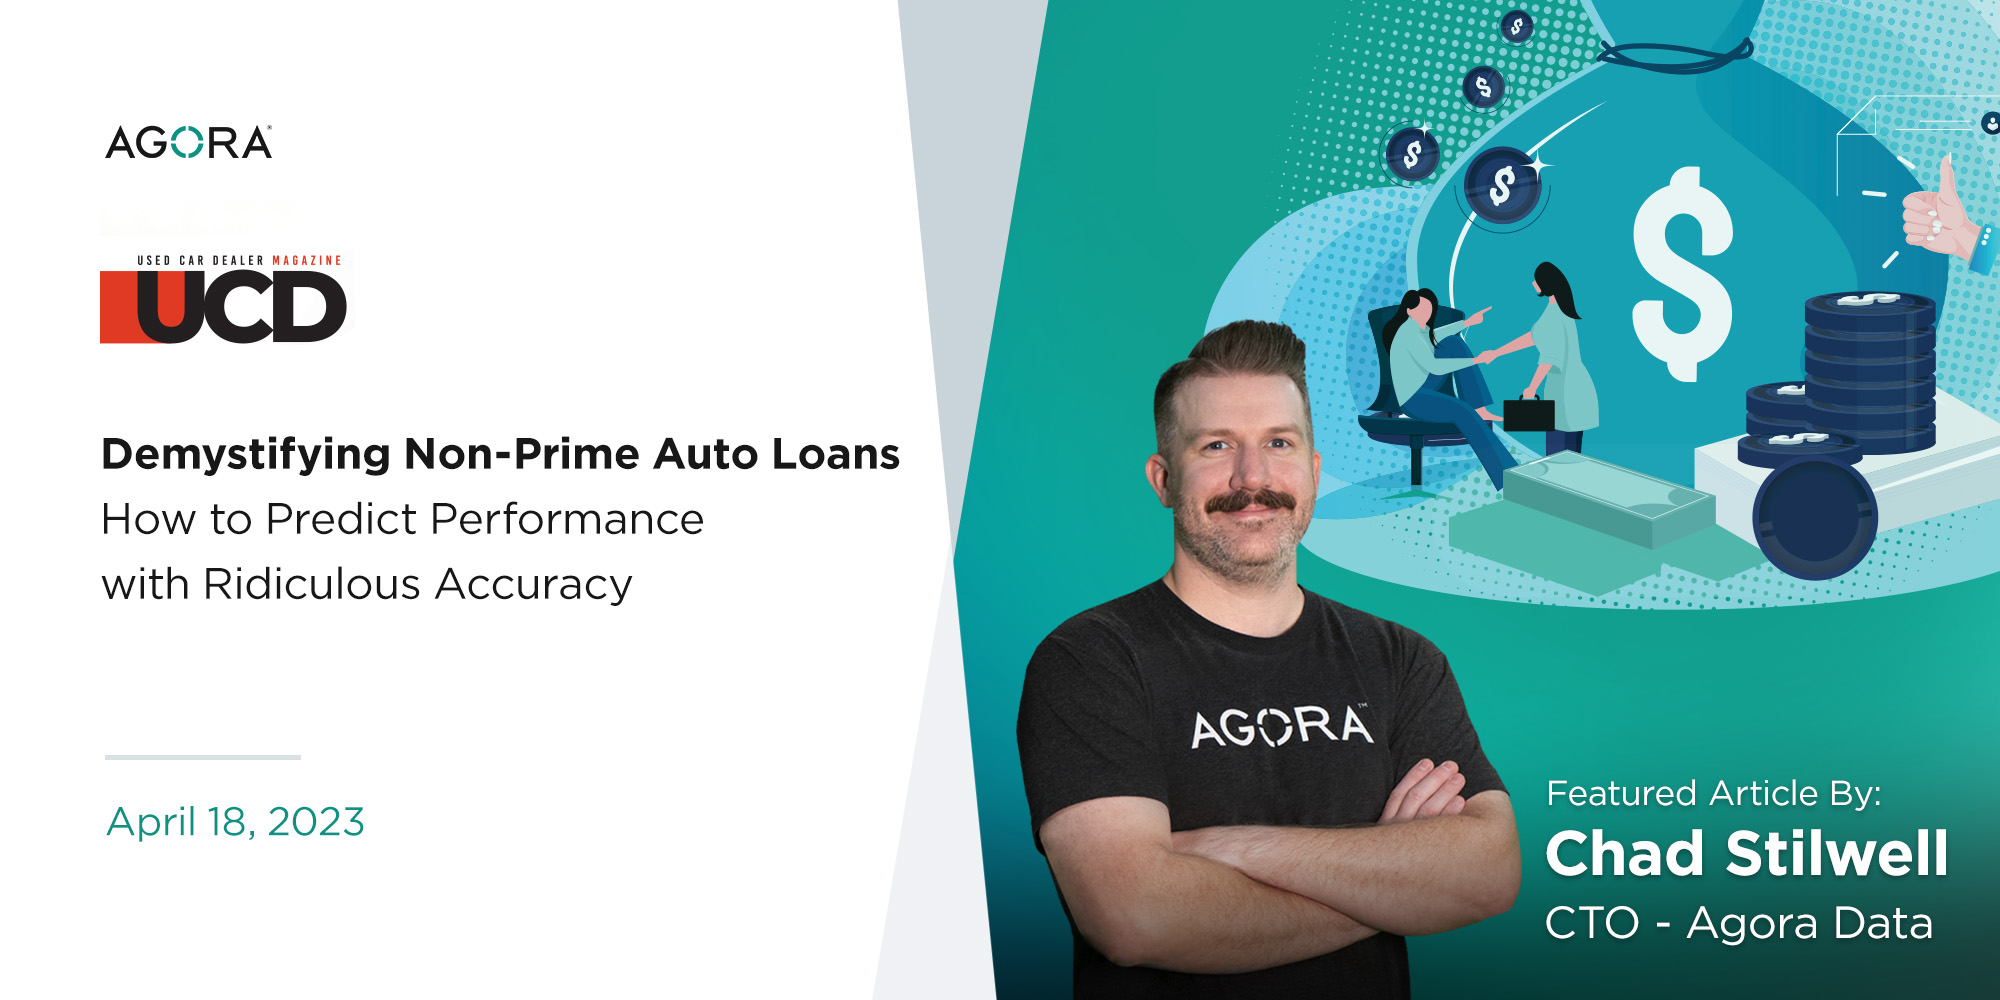 Demystifying Non-Prime Auto Loans: How to Predict Performance with Ridiculous Accuracy